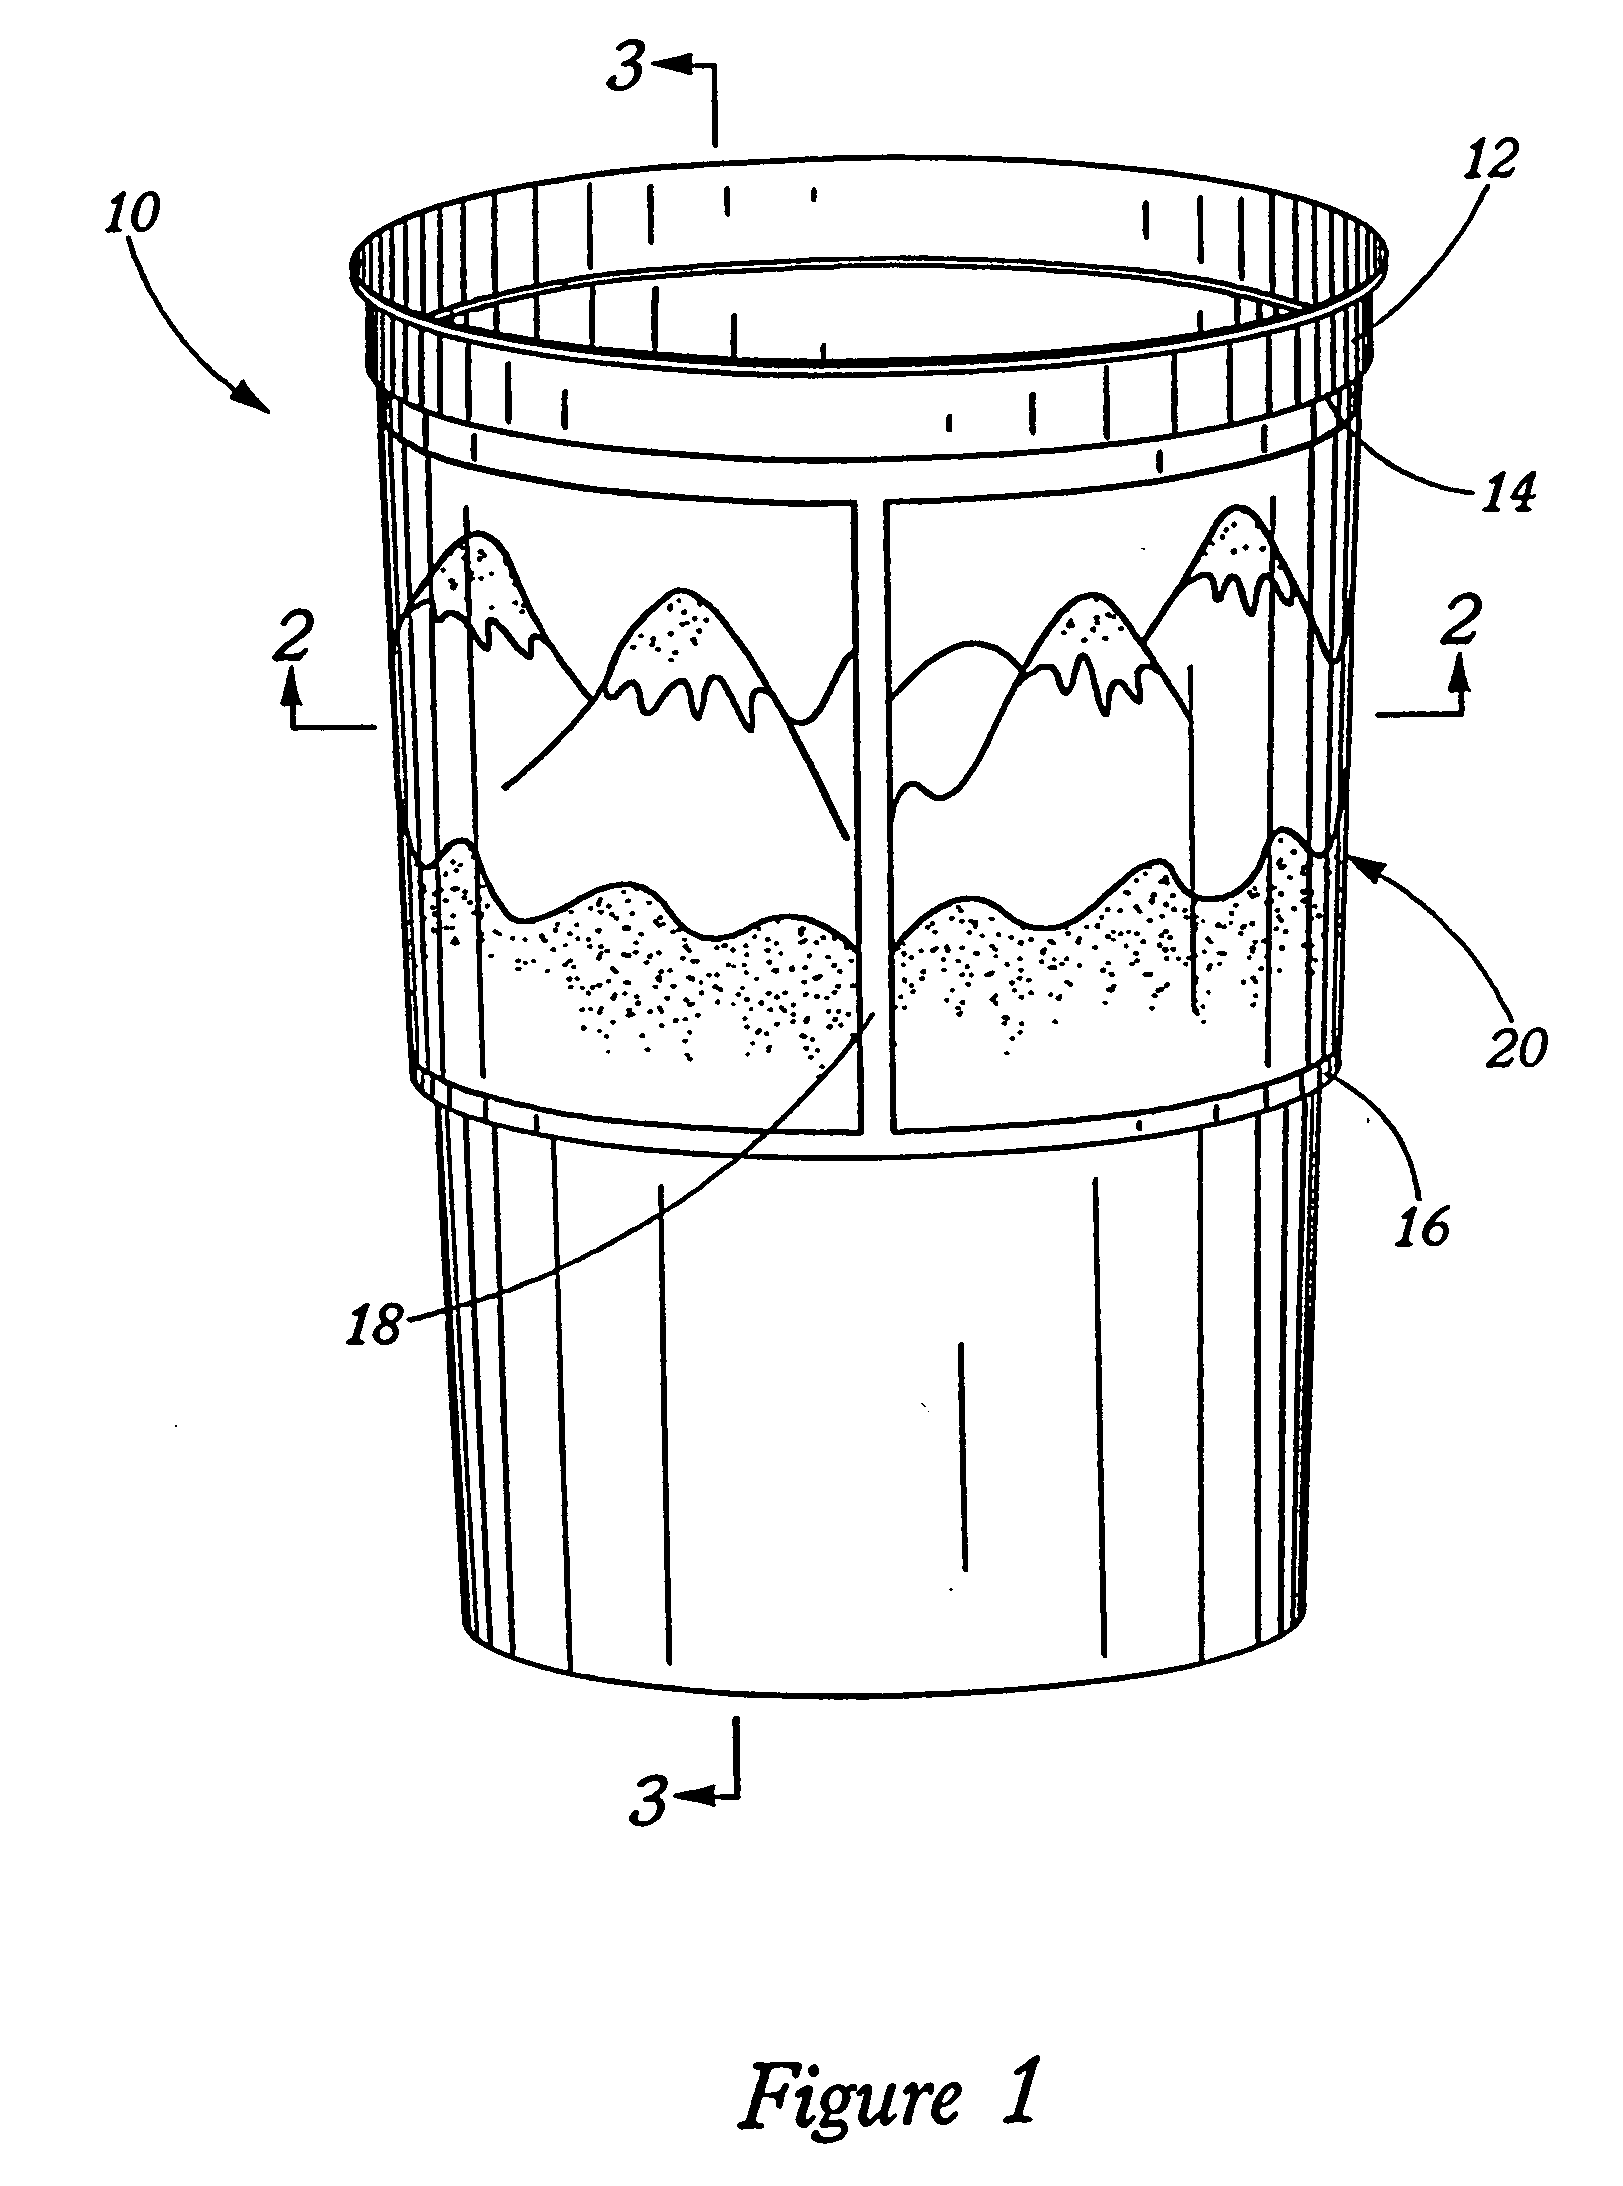 Method of bonding a lenticular lens sheet to plastic objects and objects made from same